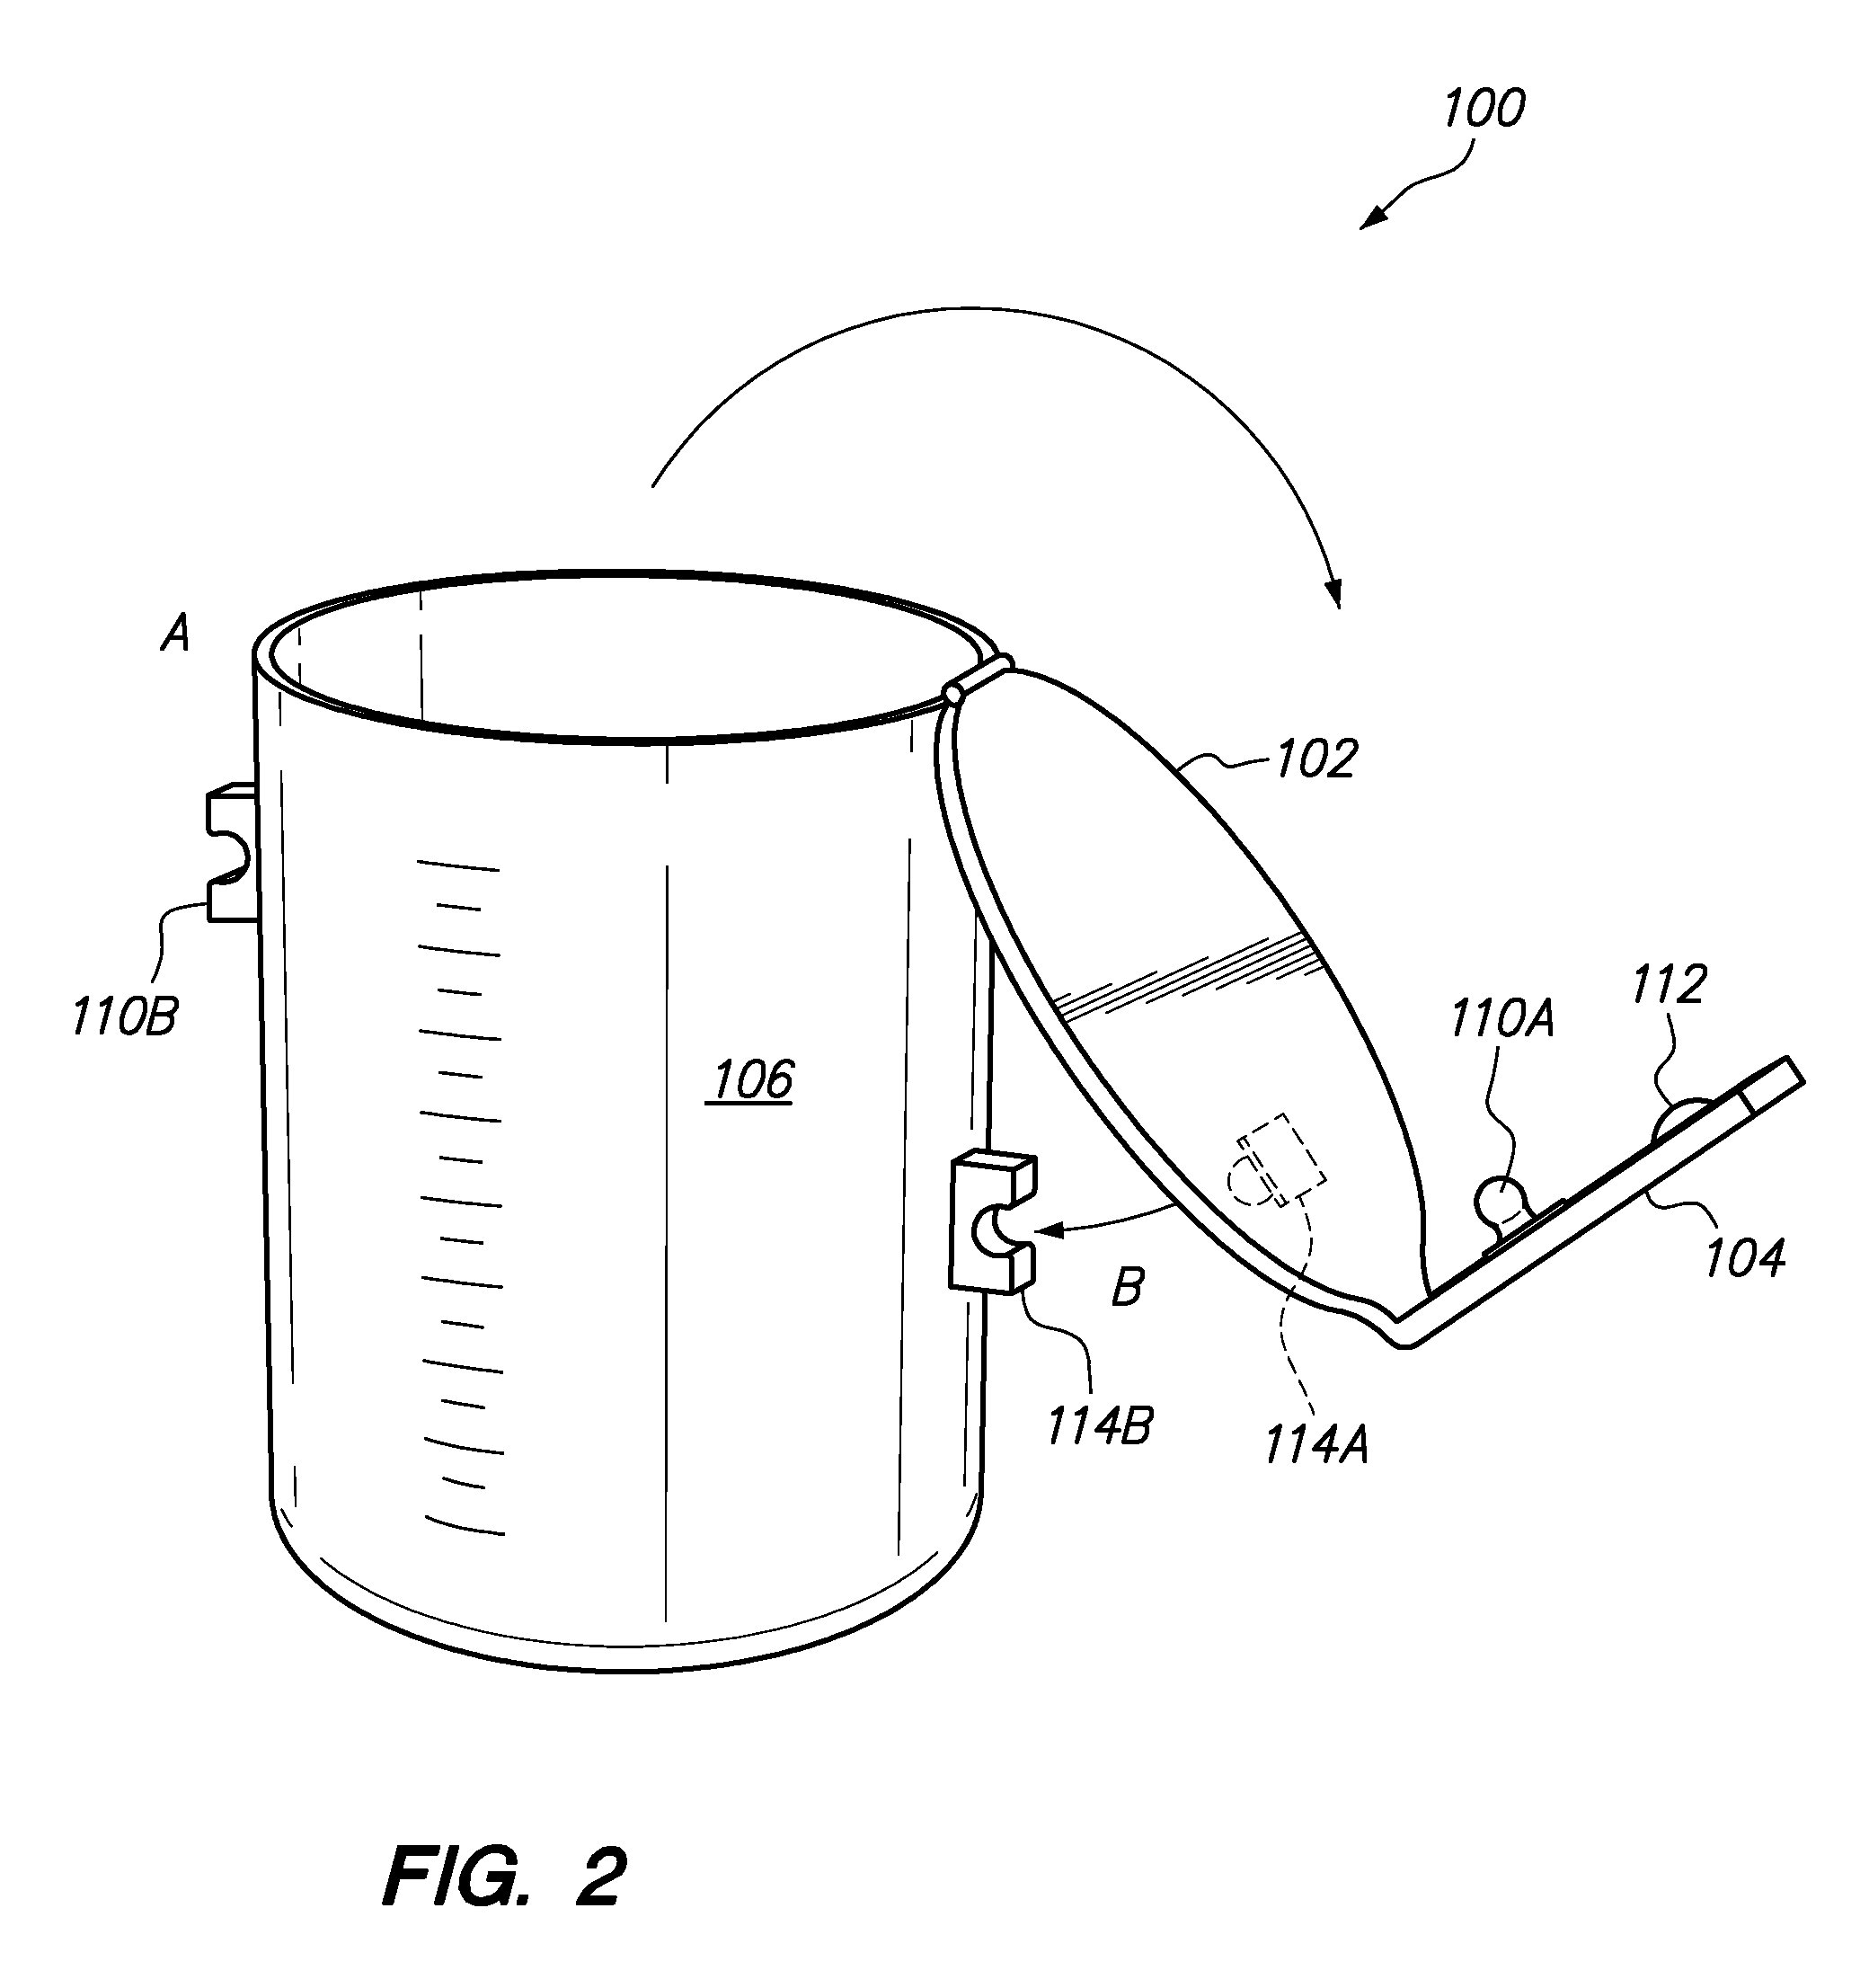 Powder supplement scooping system and method